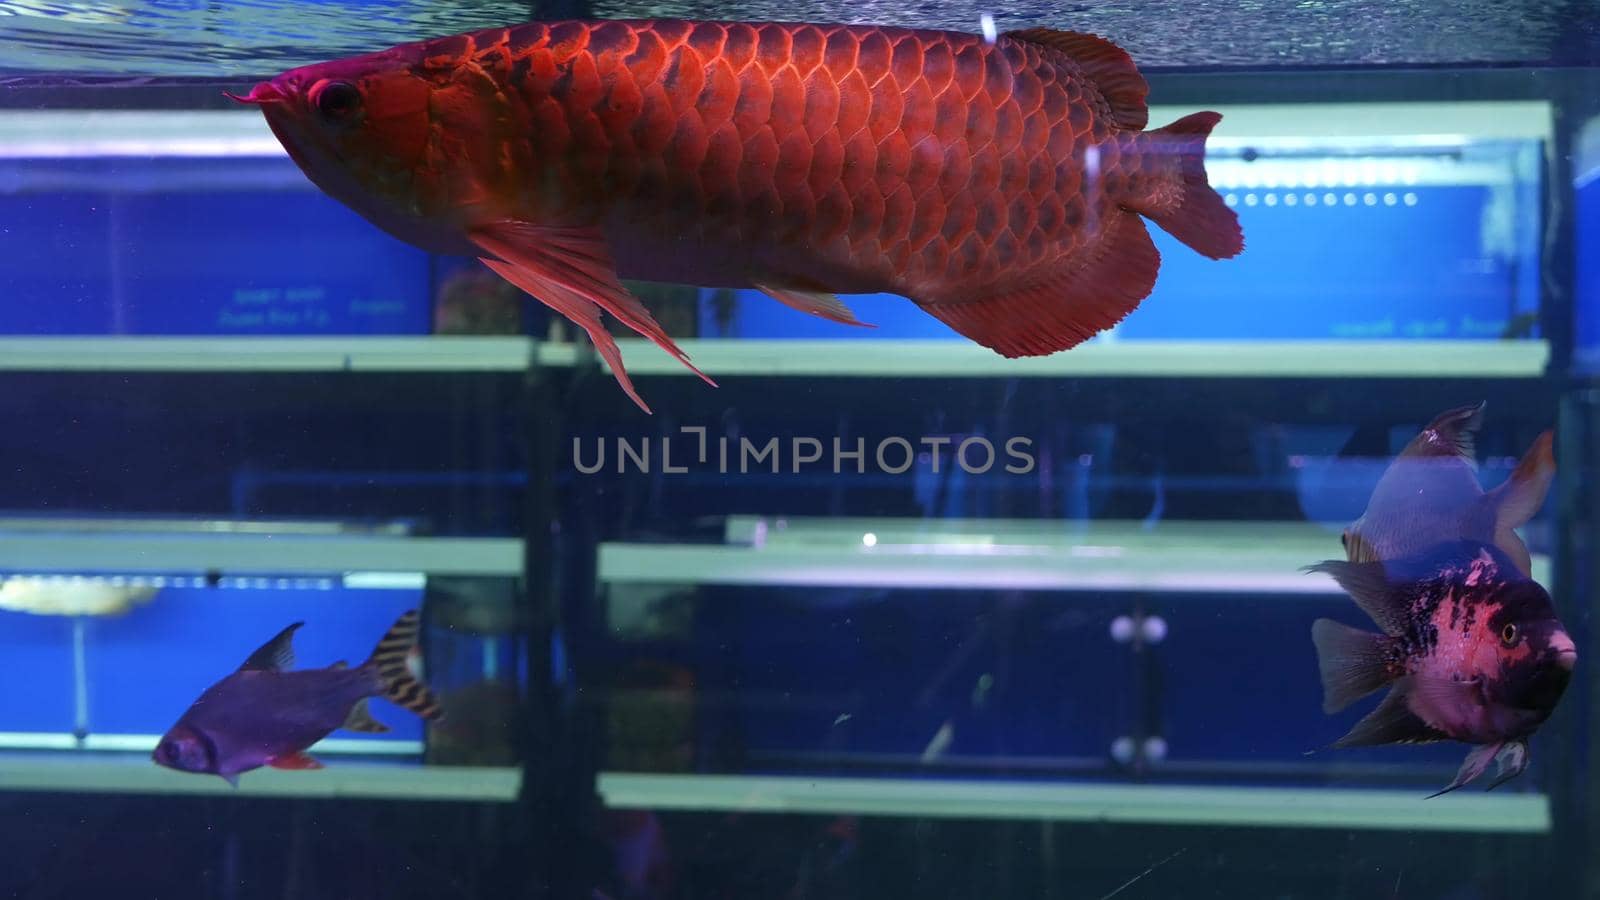 Diversity of tropical fishes in exotic decorative aquarium. Assortment in chatuchak fish market pet shops. Close up of colorful pets displayed on stalls. Variety for sale on counter, trading on bazaar by DogoraSun